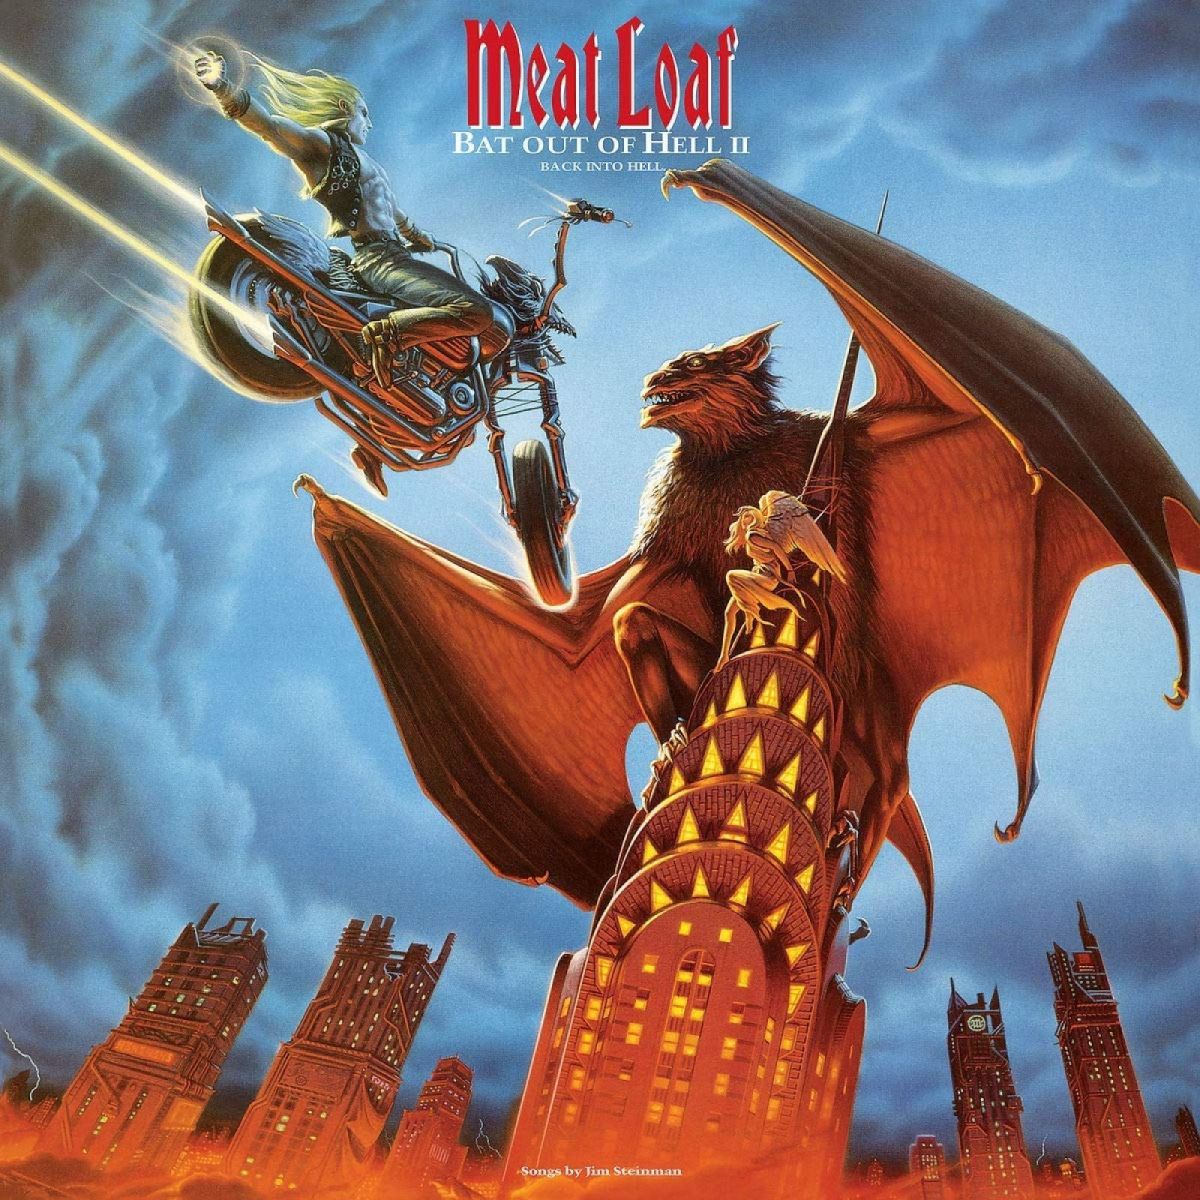 Bat Out of Hell II: Back into Hell" album cover